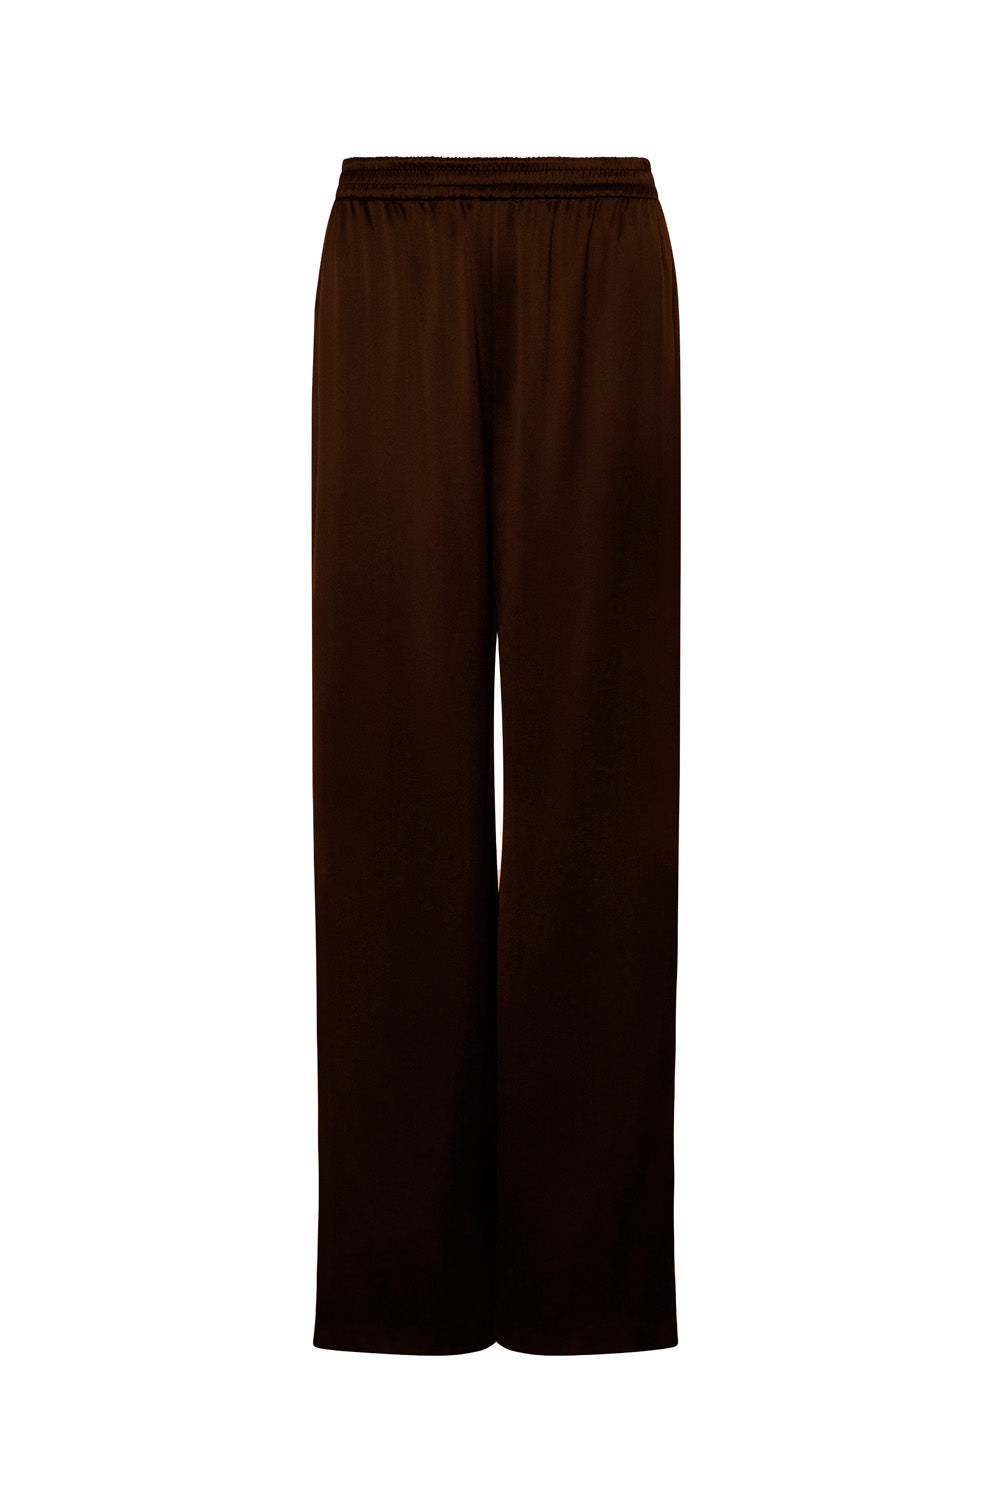 Genevieve Trouser in Chocolate